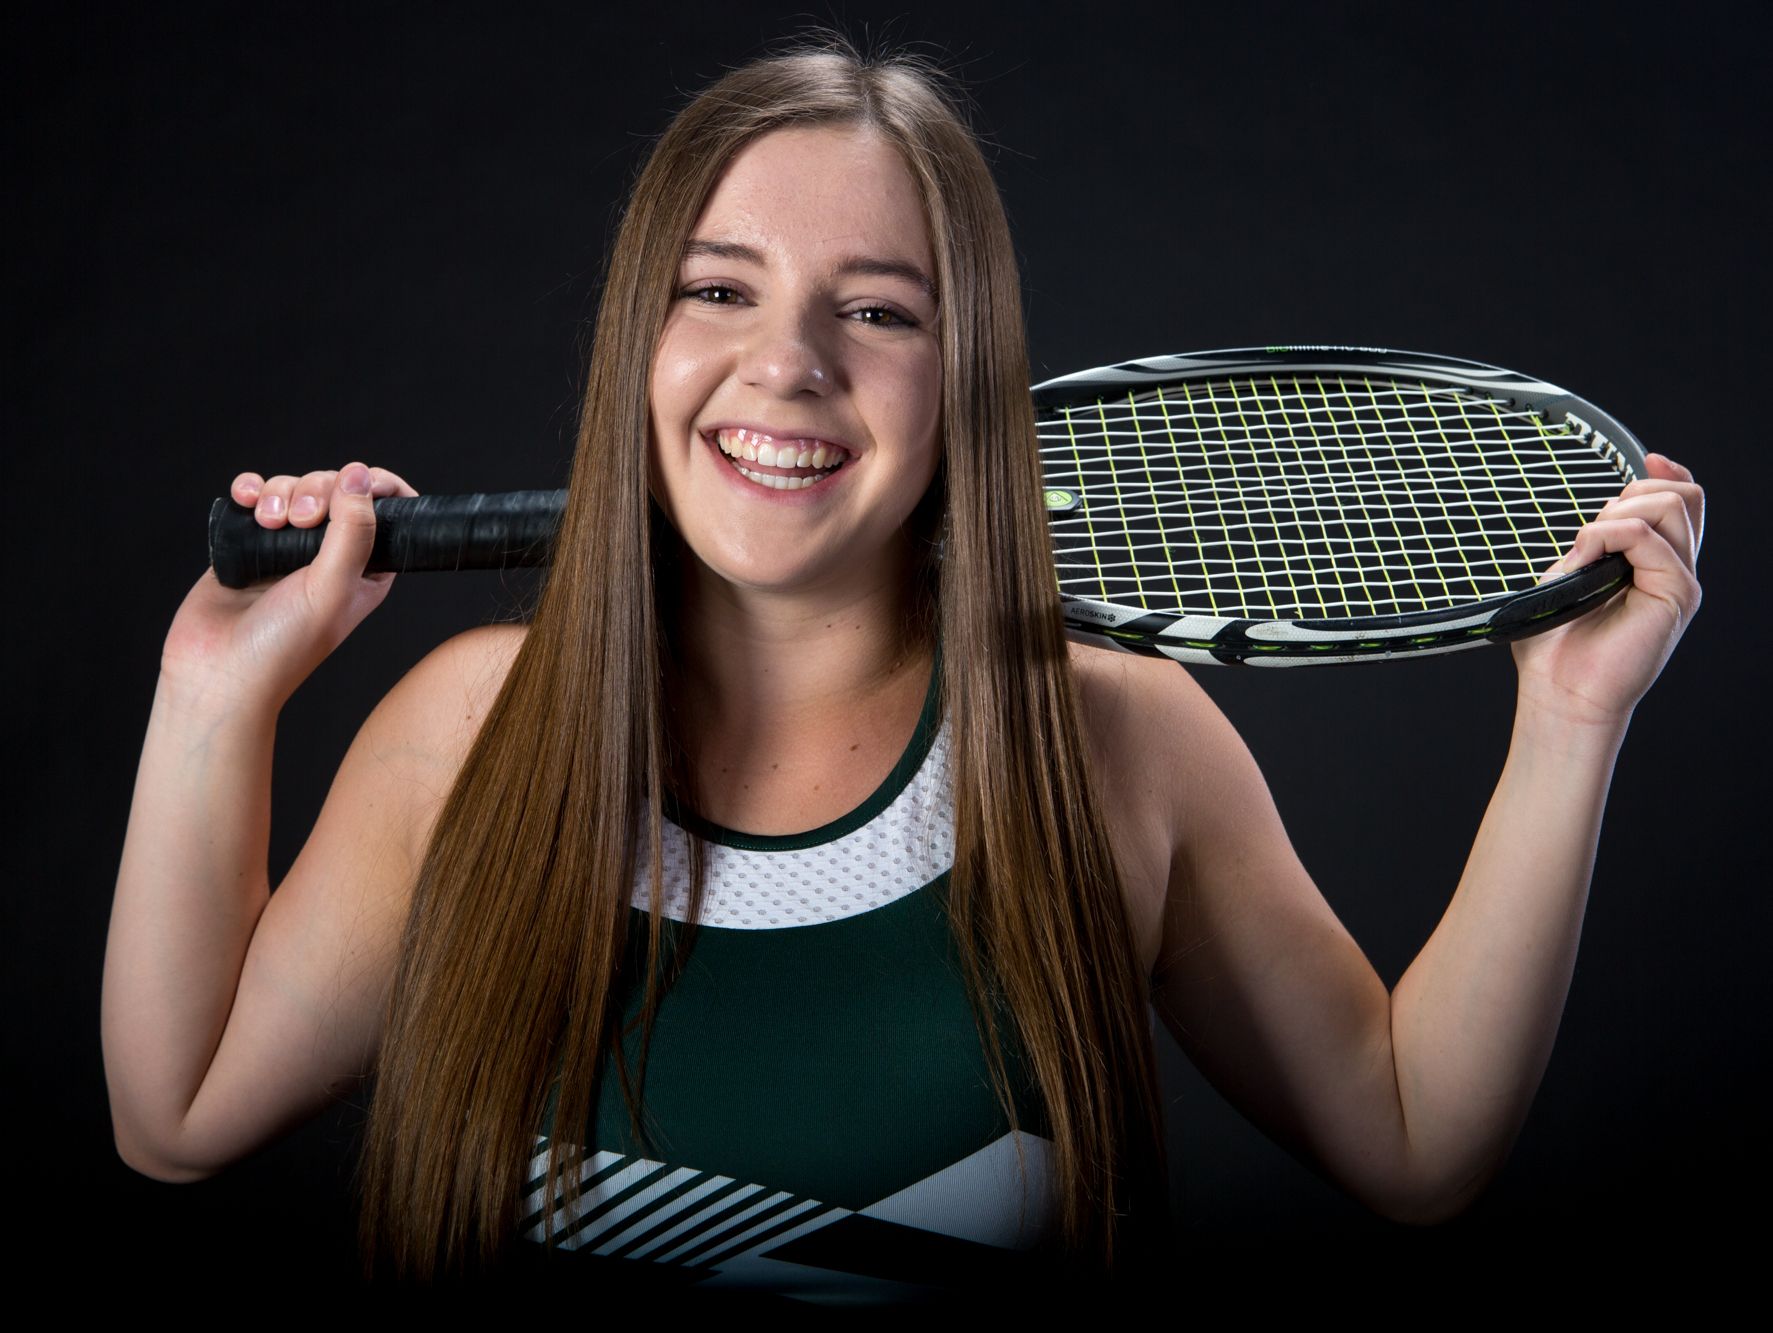 Chayse Olson from Chandler Basha is the azcentral sports Arizona Sports Awards March Athlete of the Month, presented by La-Z-Boy Furniture Galleries.